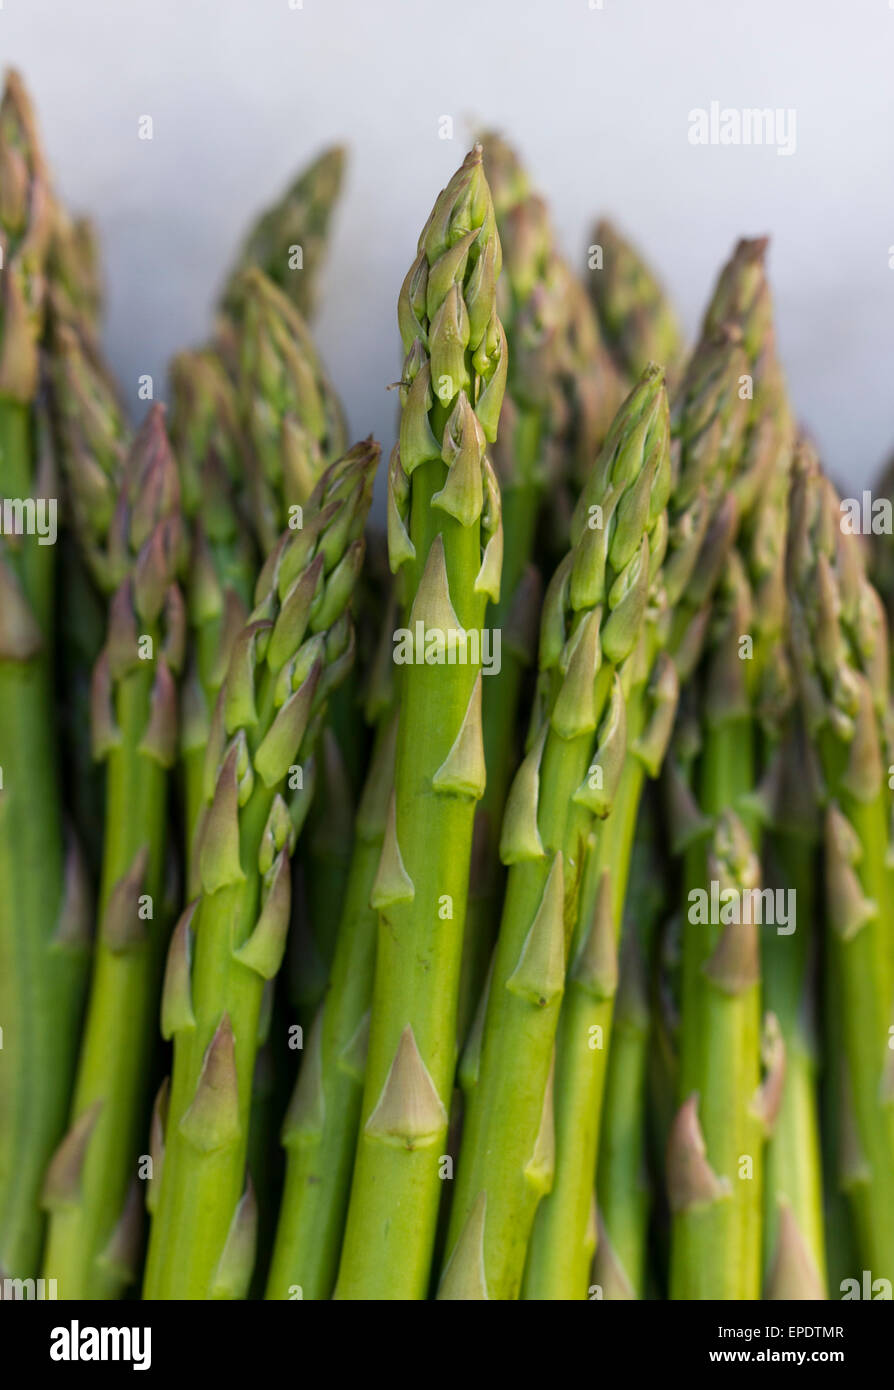 Close-up of asparagus spears Stock Photo